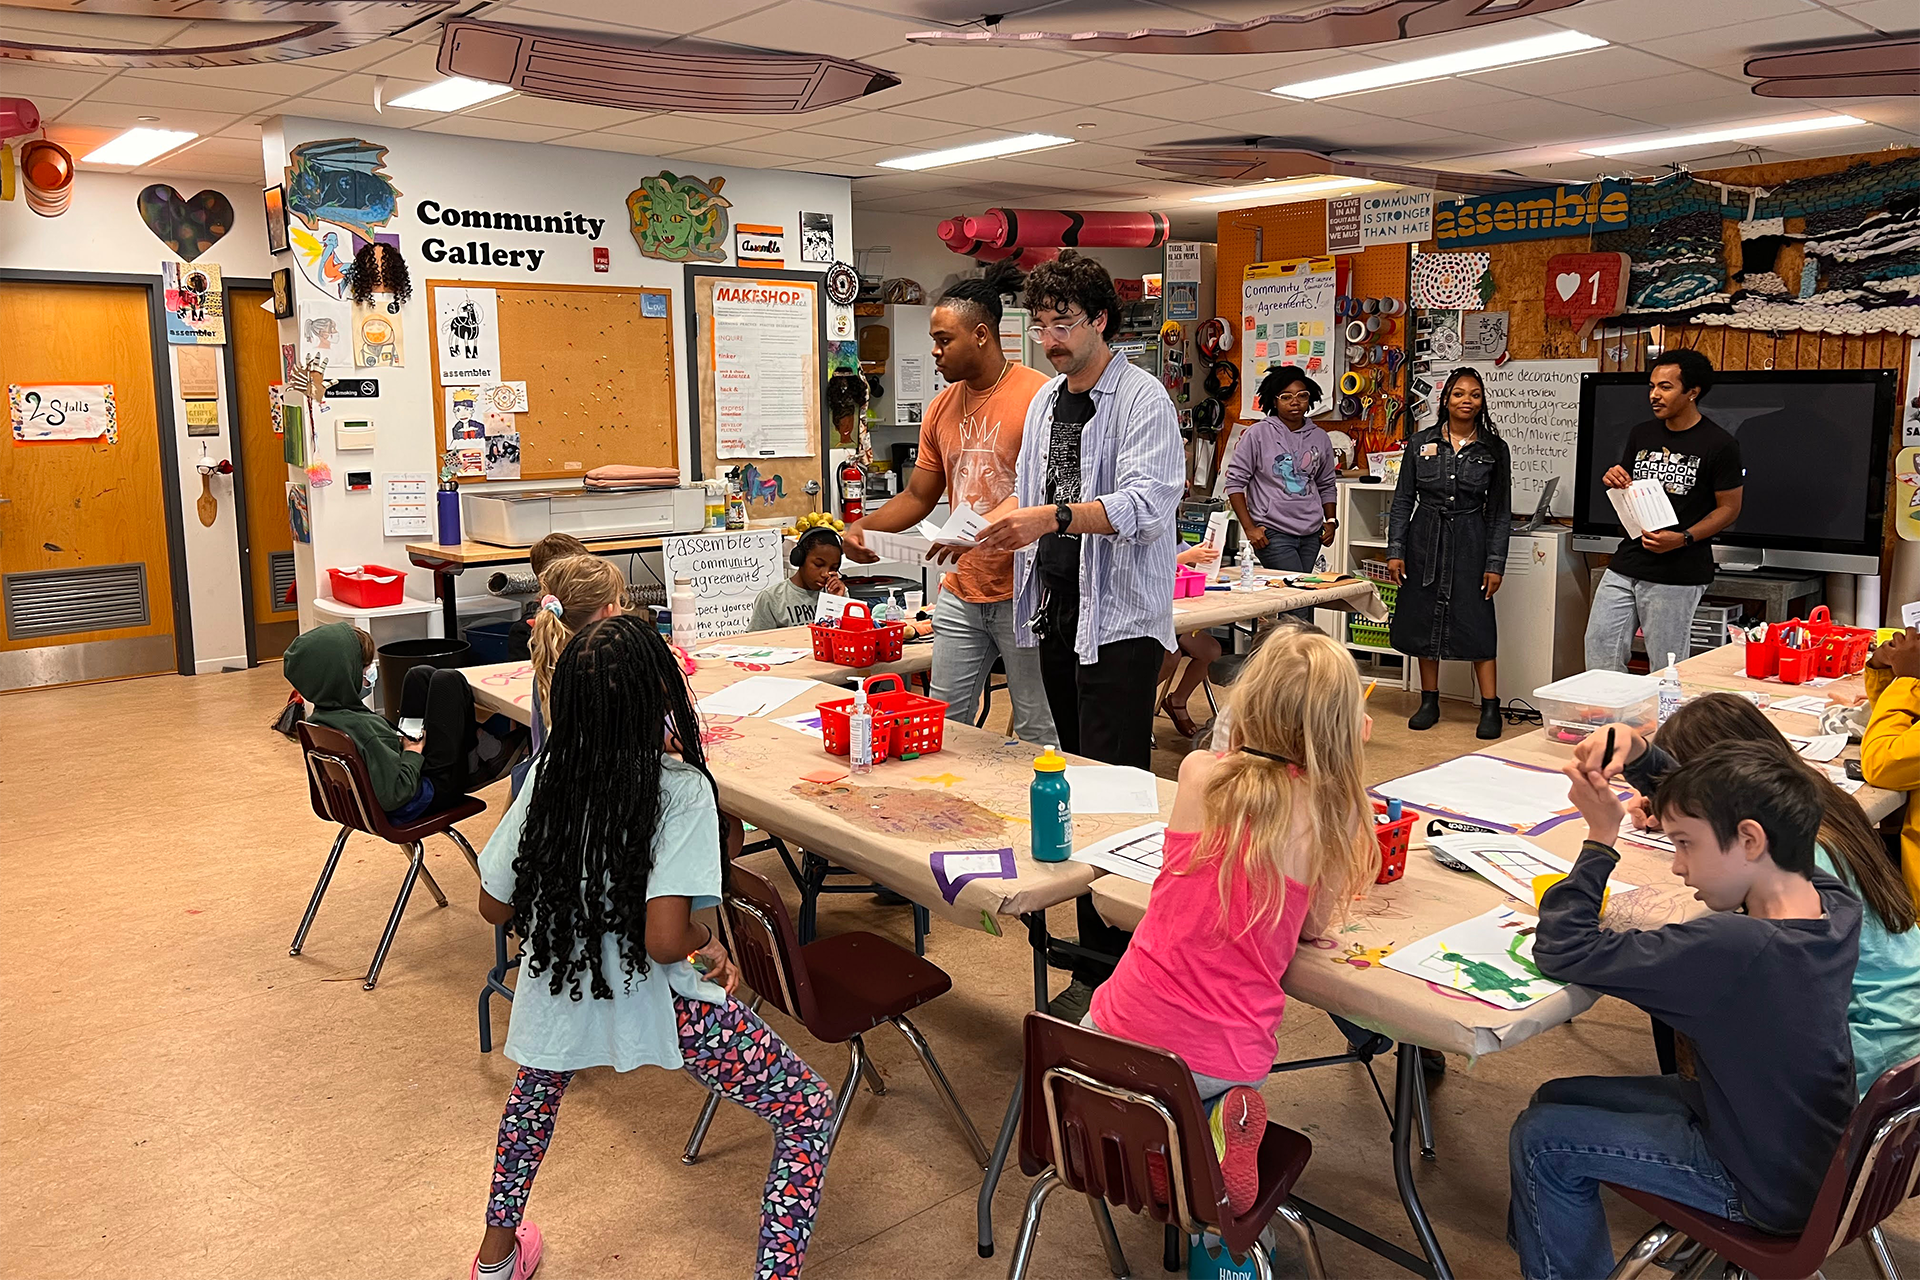 https://aap.cornell.edu/A%20classroom%20of%20elementary%20students%20are%20gathered%20around%20tables%2C%20being%20instructed%20by%20young%20adults